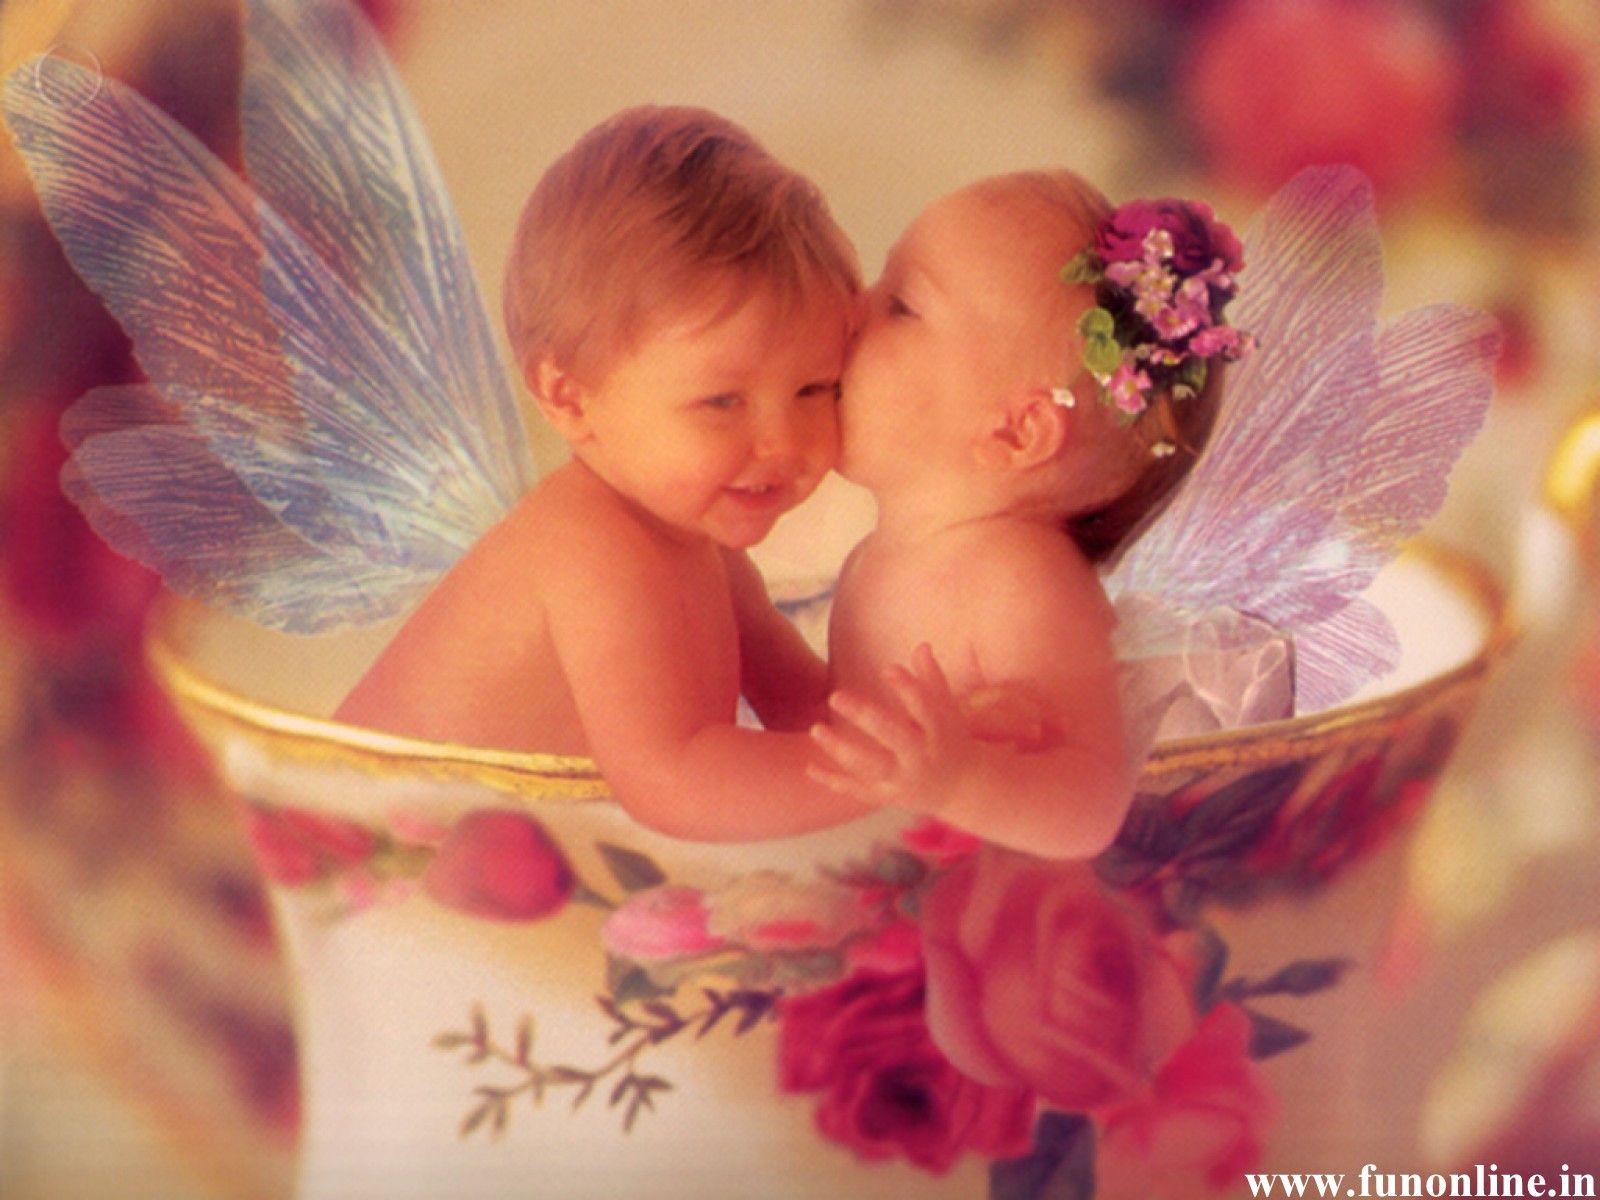 Baby Love Wallpaper Gratifying HD For Free Bright Image